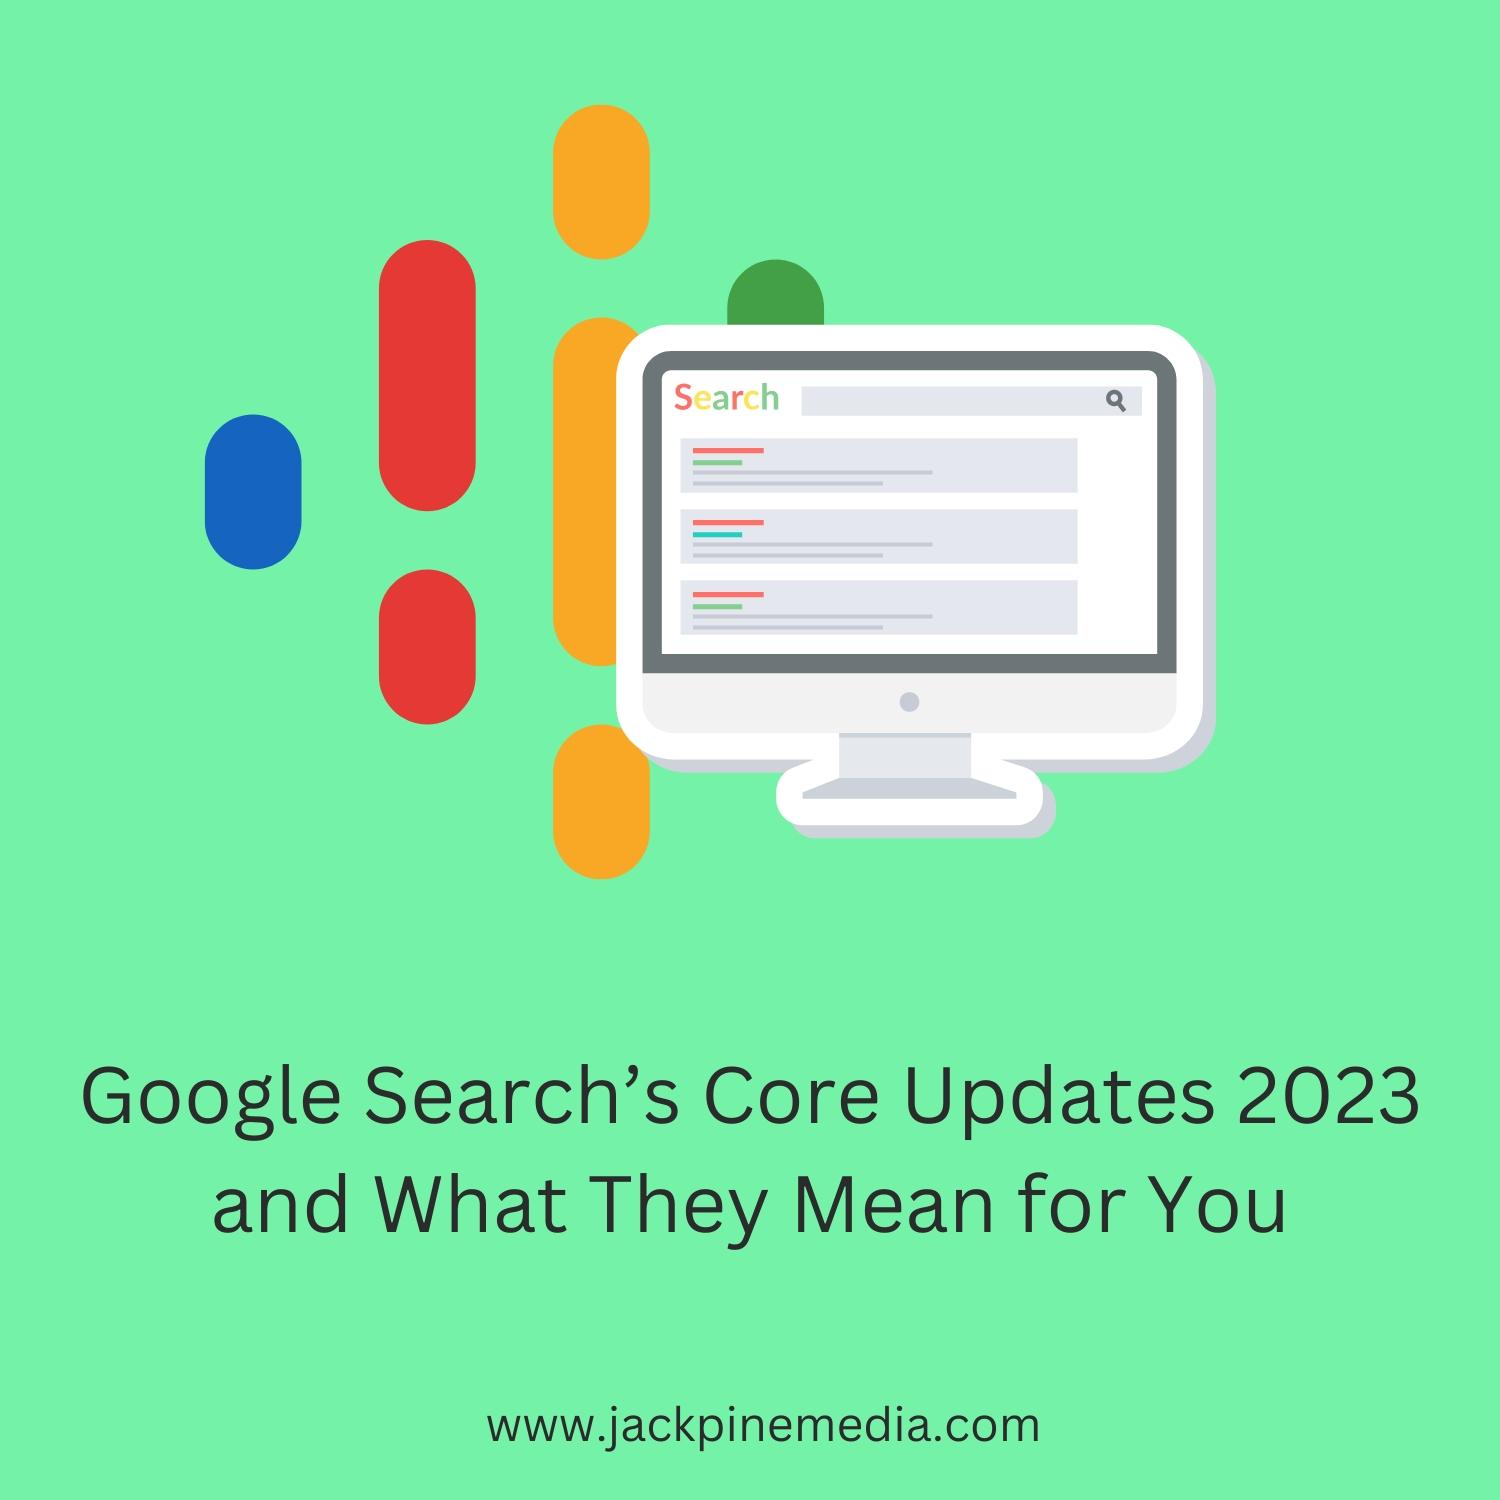 You are currently viewing Google Search’s Core Updates 2023 and What They Mean for You.